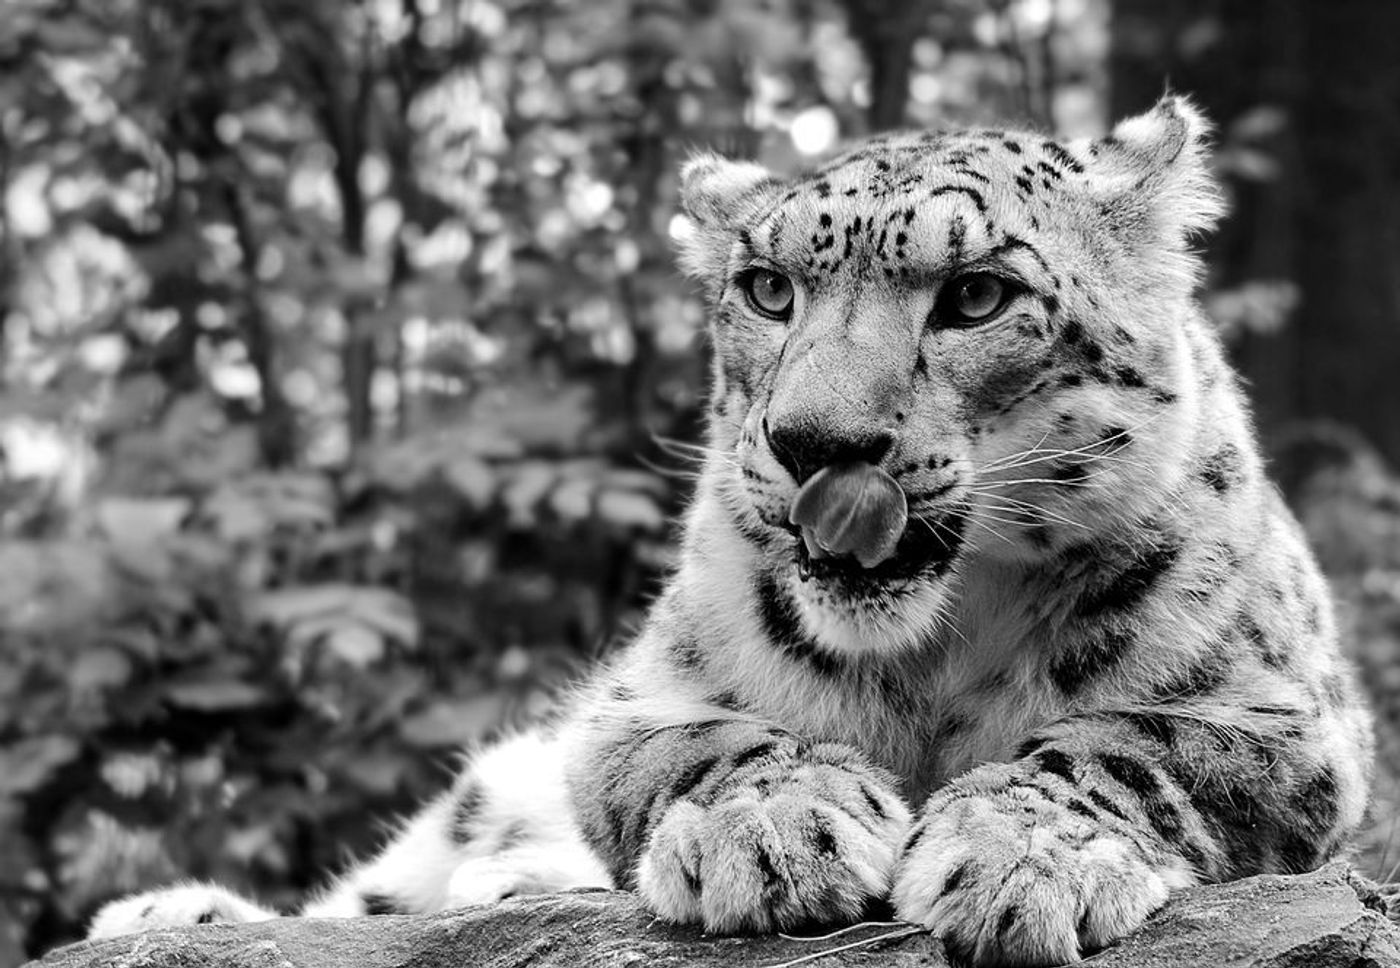 More snow leopards are being killed than originally thought, a new report suggests.